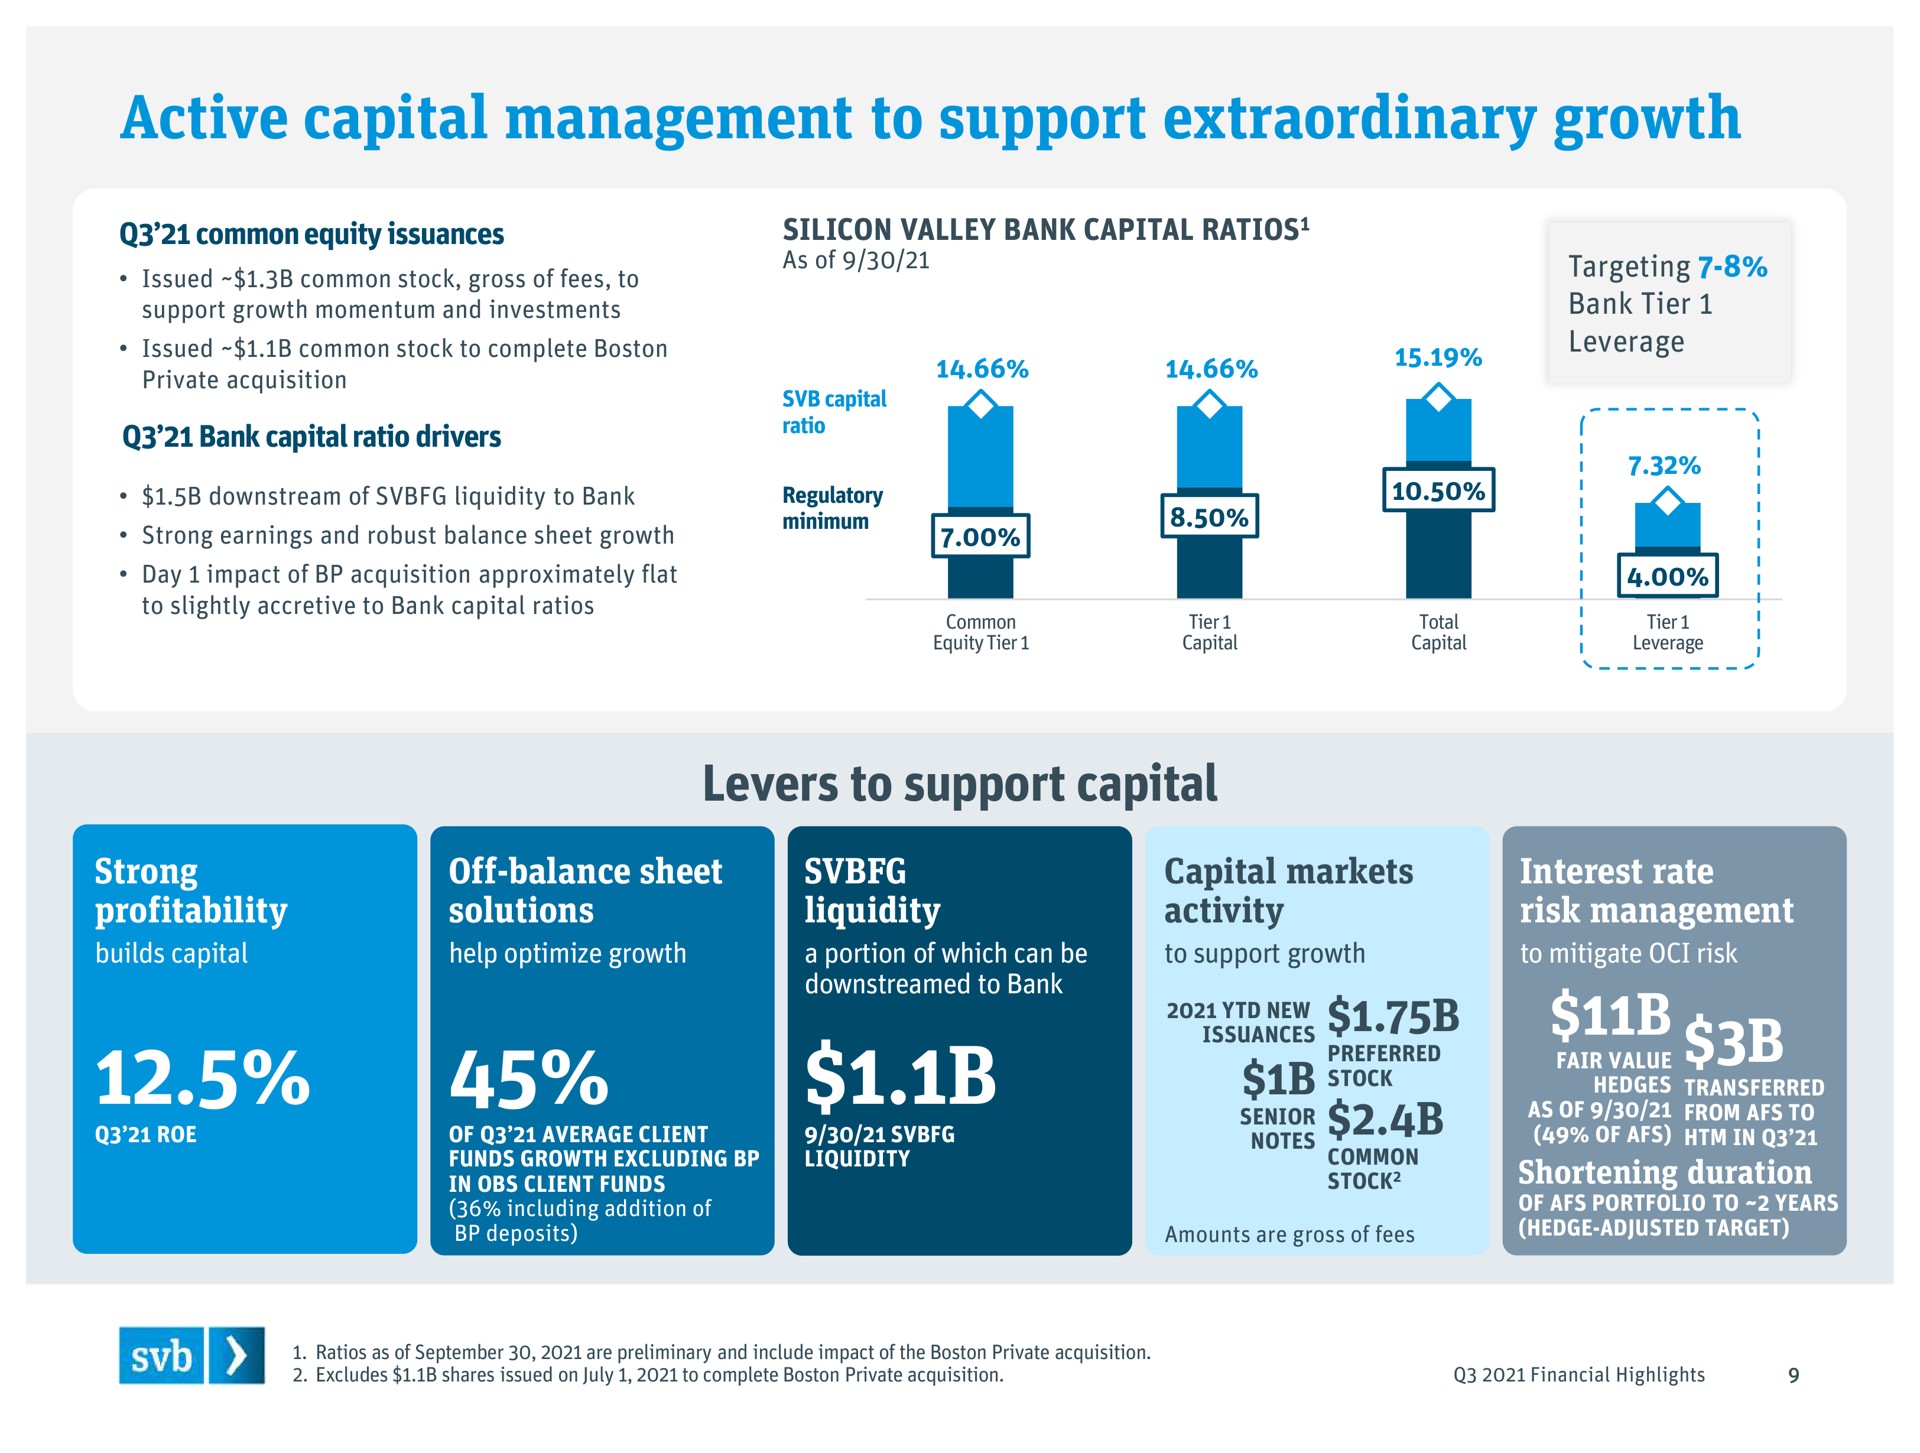 active capital management to support extraordinary growth levers to support capital sens | Silicon Valley Bank